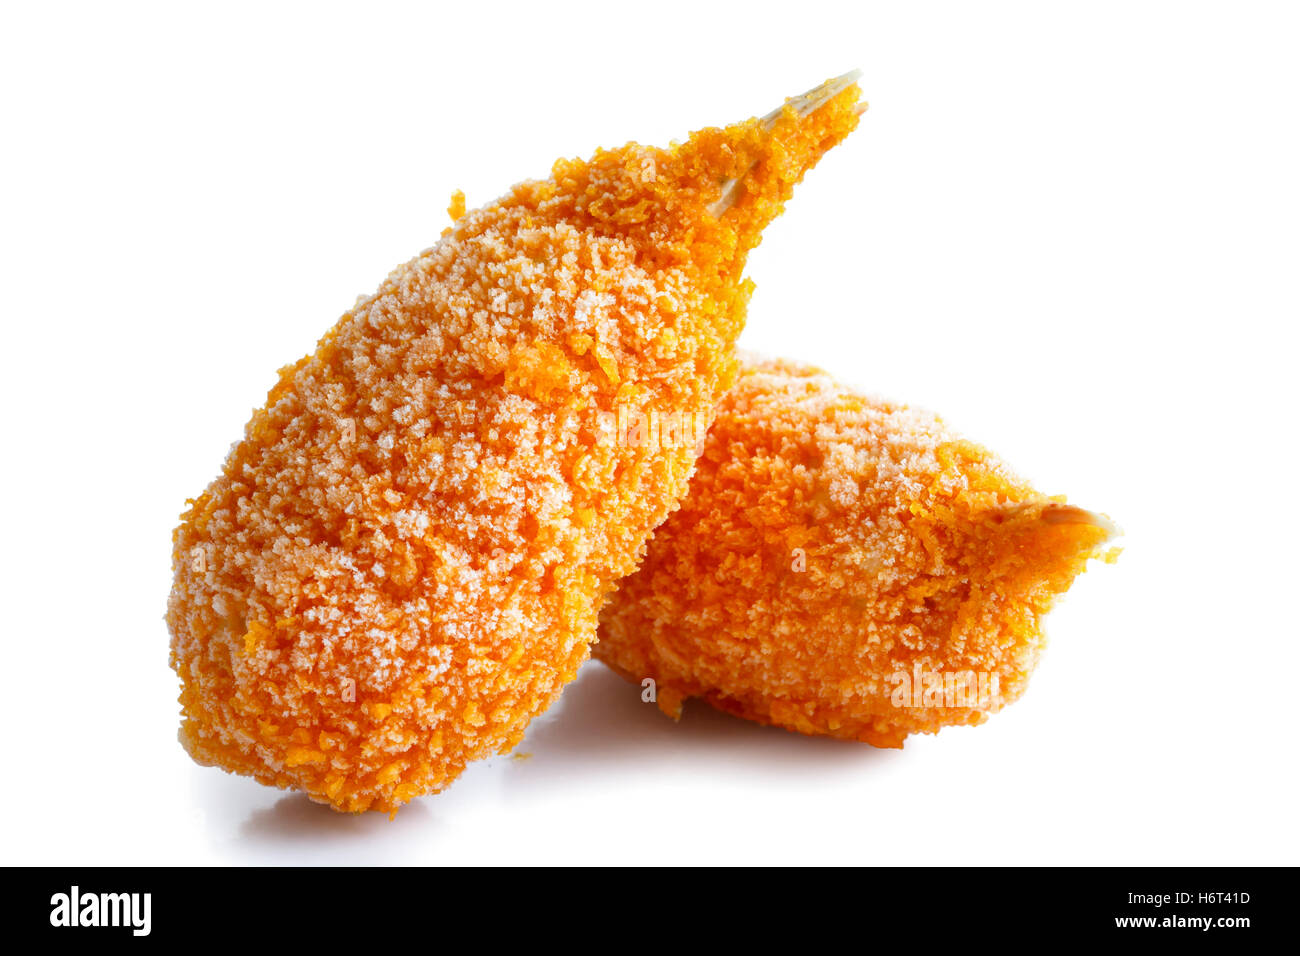 Two frozen breaded surimi crab claws in perspective, isolated on white. Stock Photo